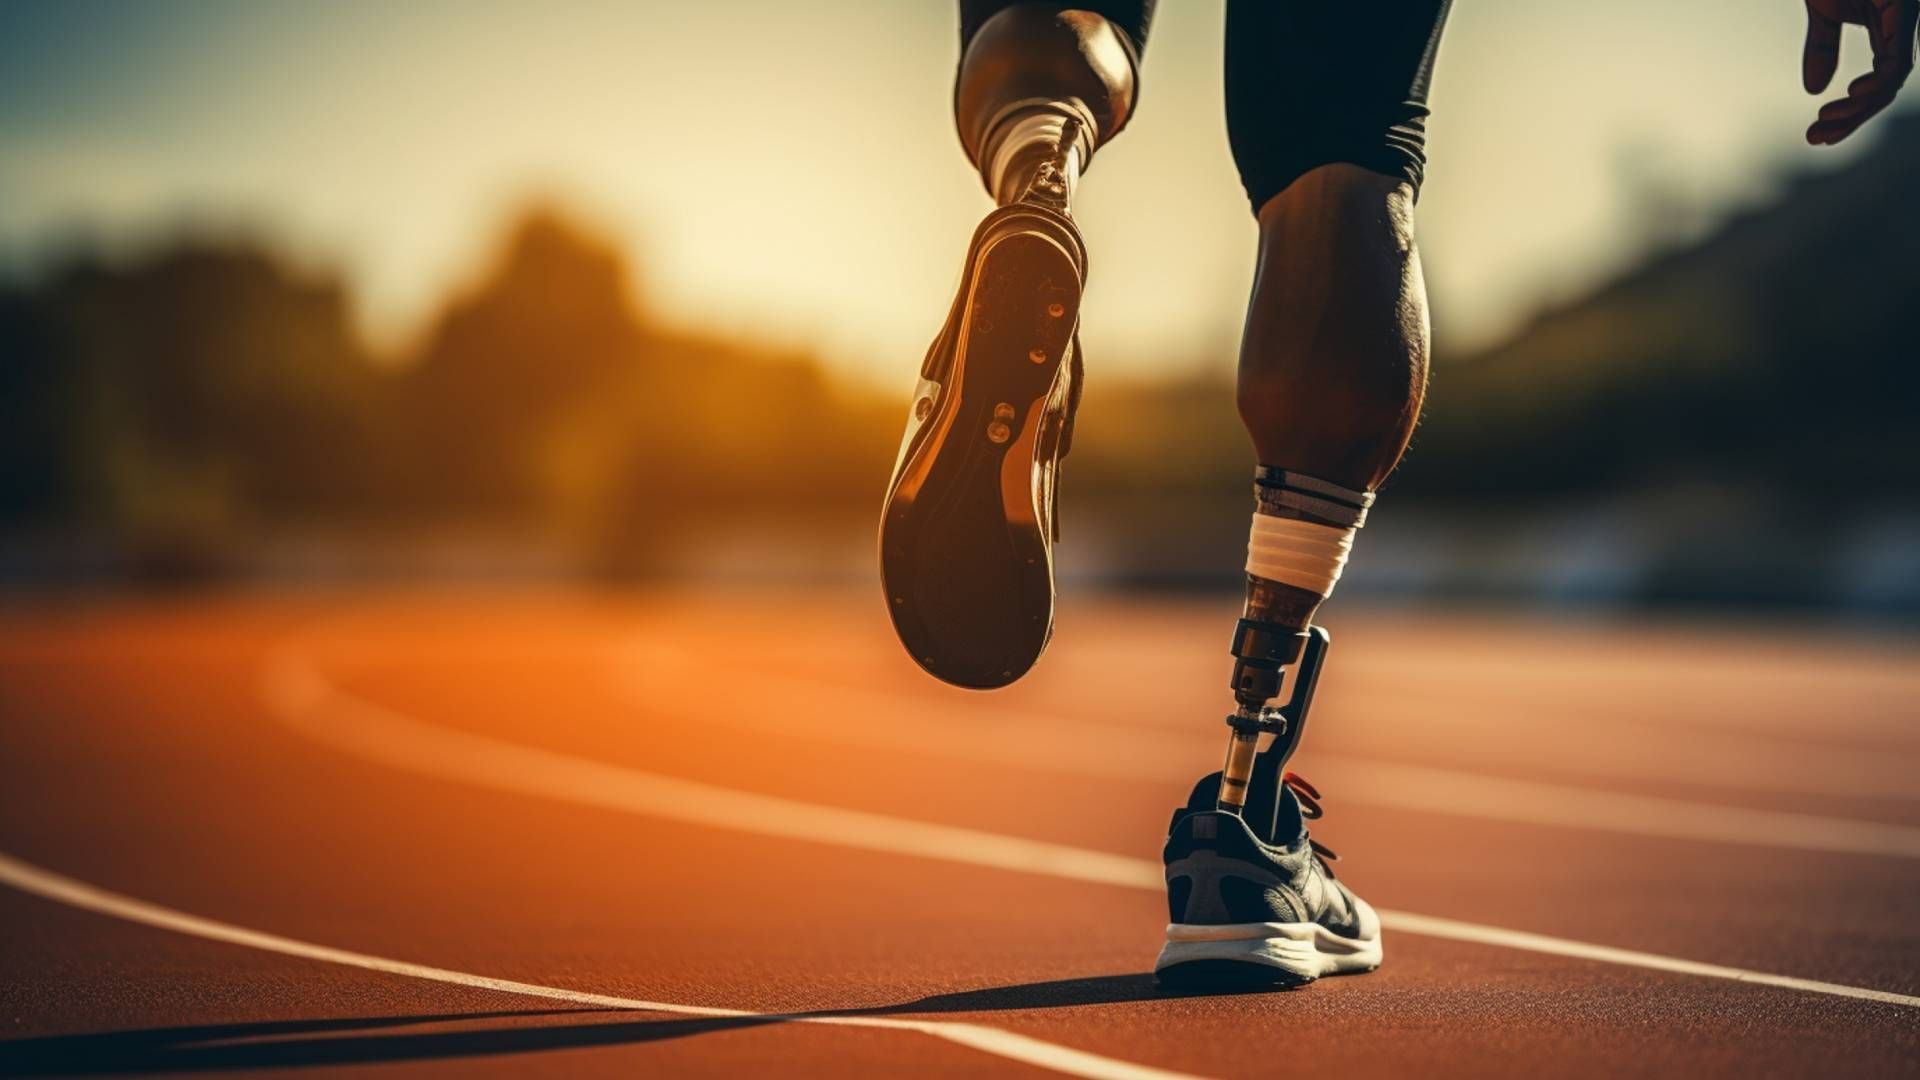 Man with a prosthetic leg below the knee on a track near Edgewood, KY, and Lawrenceburg, IN